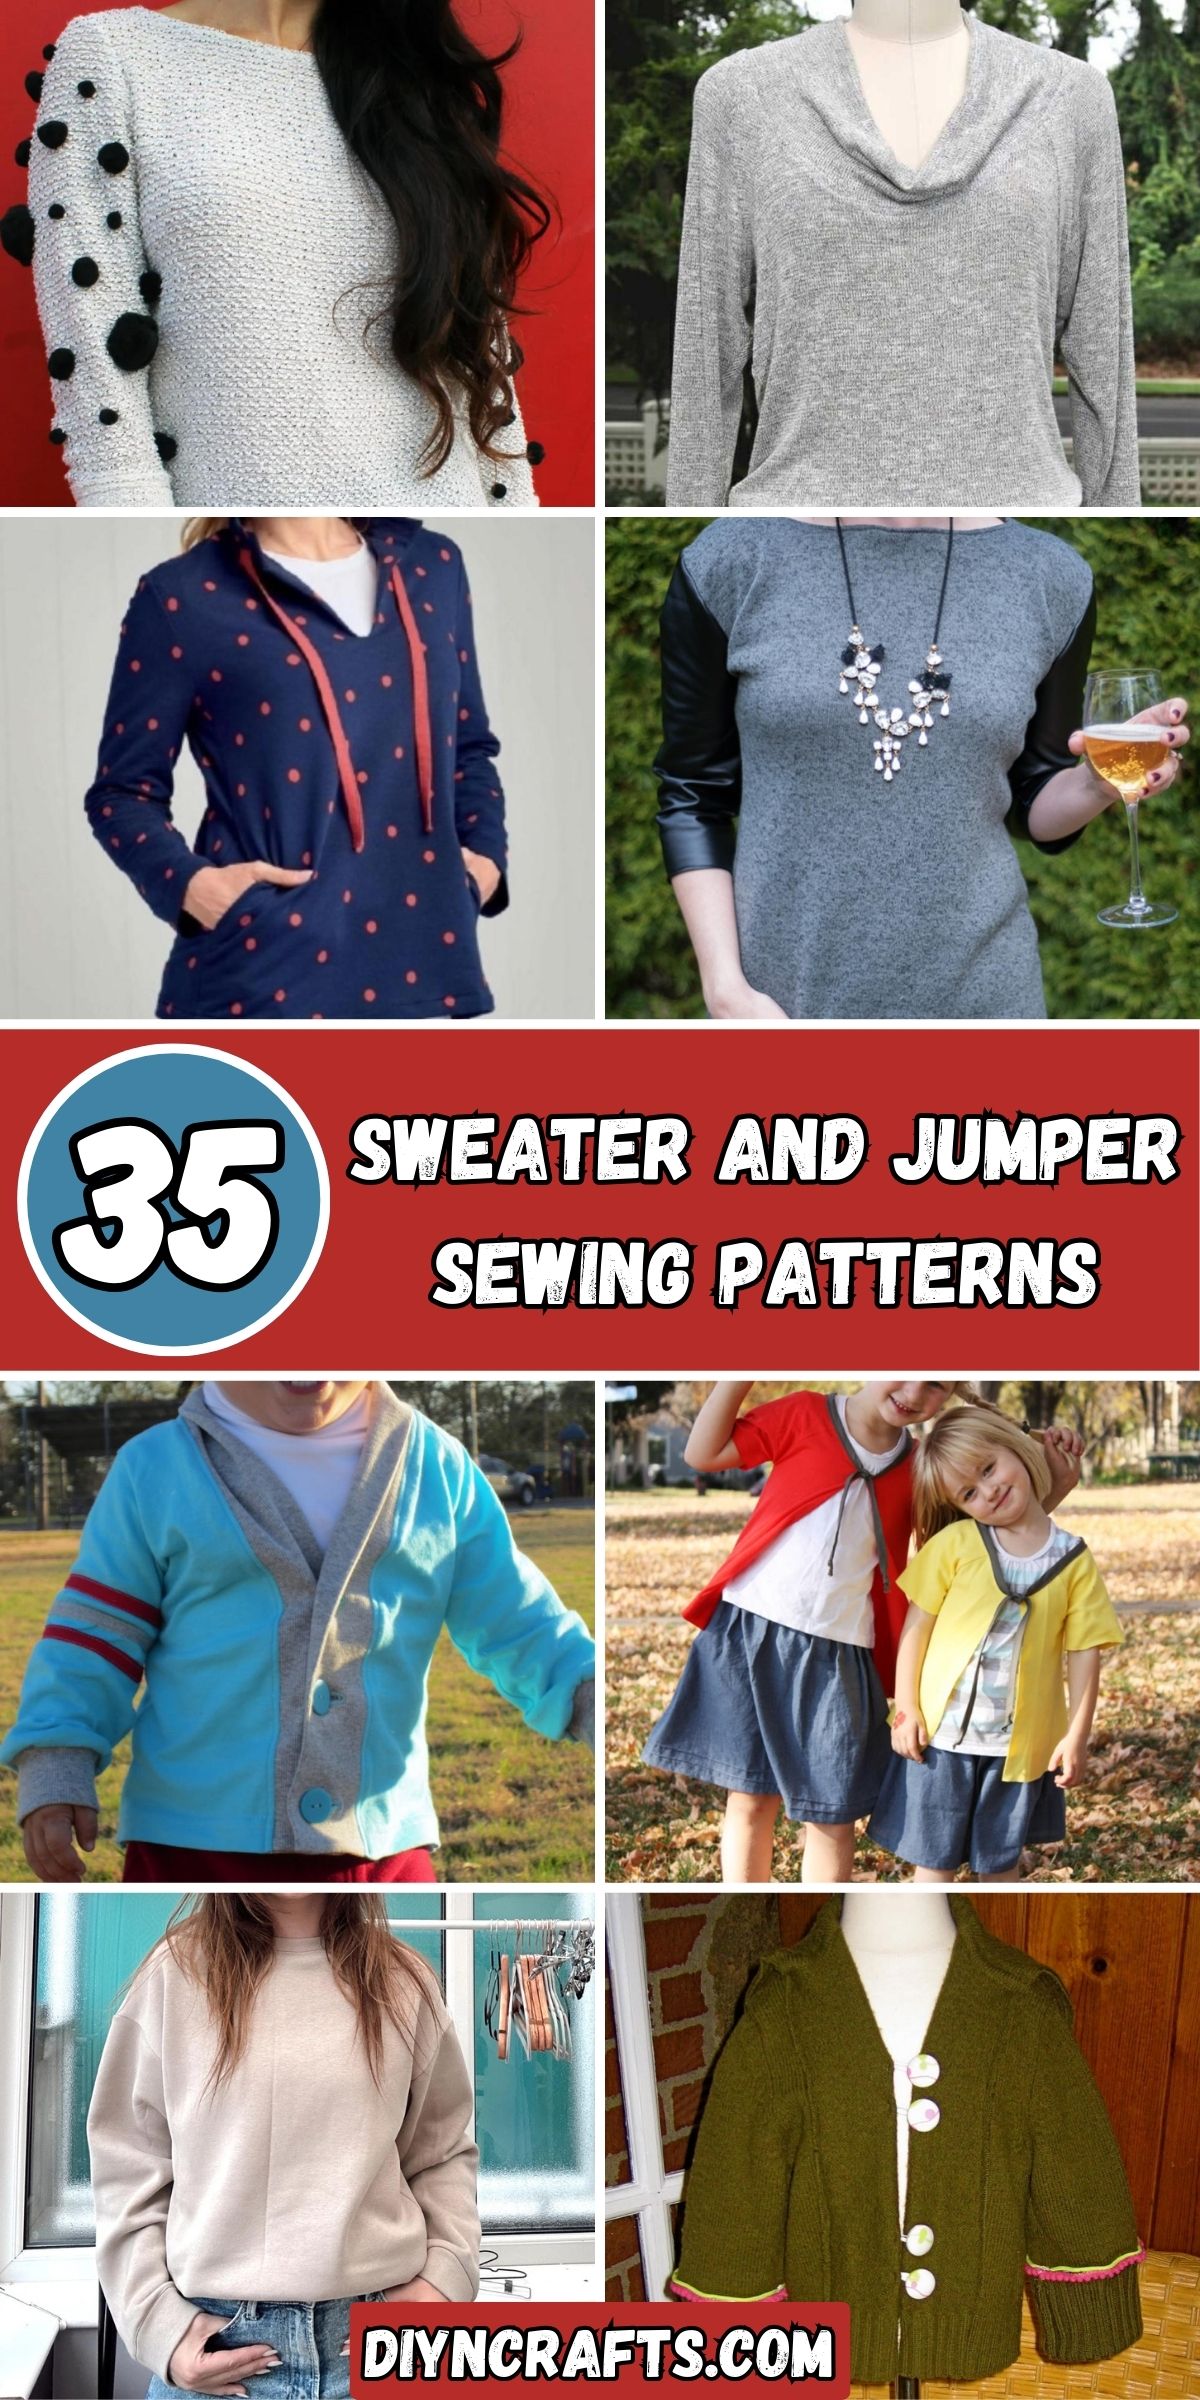 35 Sweater and Jumper Sewing Patterns collage.